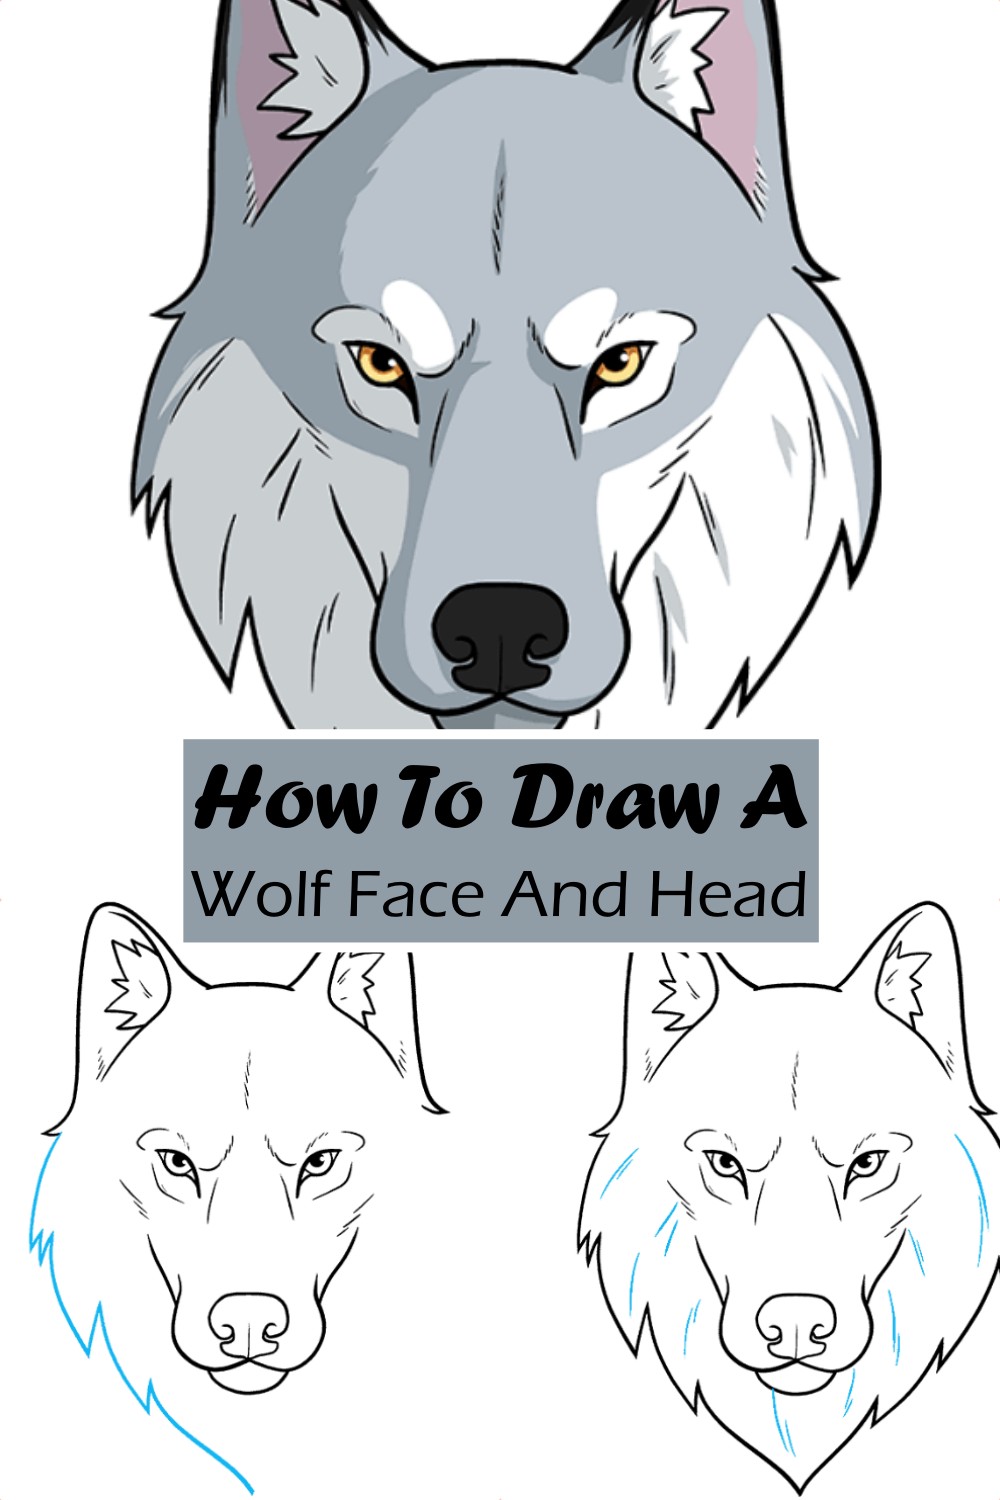 How To Draw A Wolf Face And Head